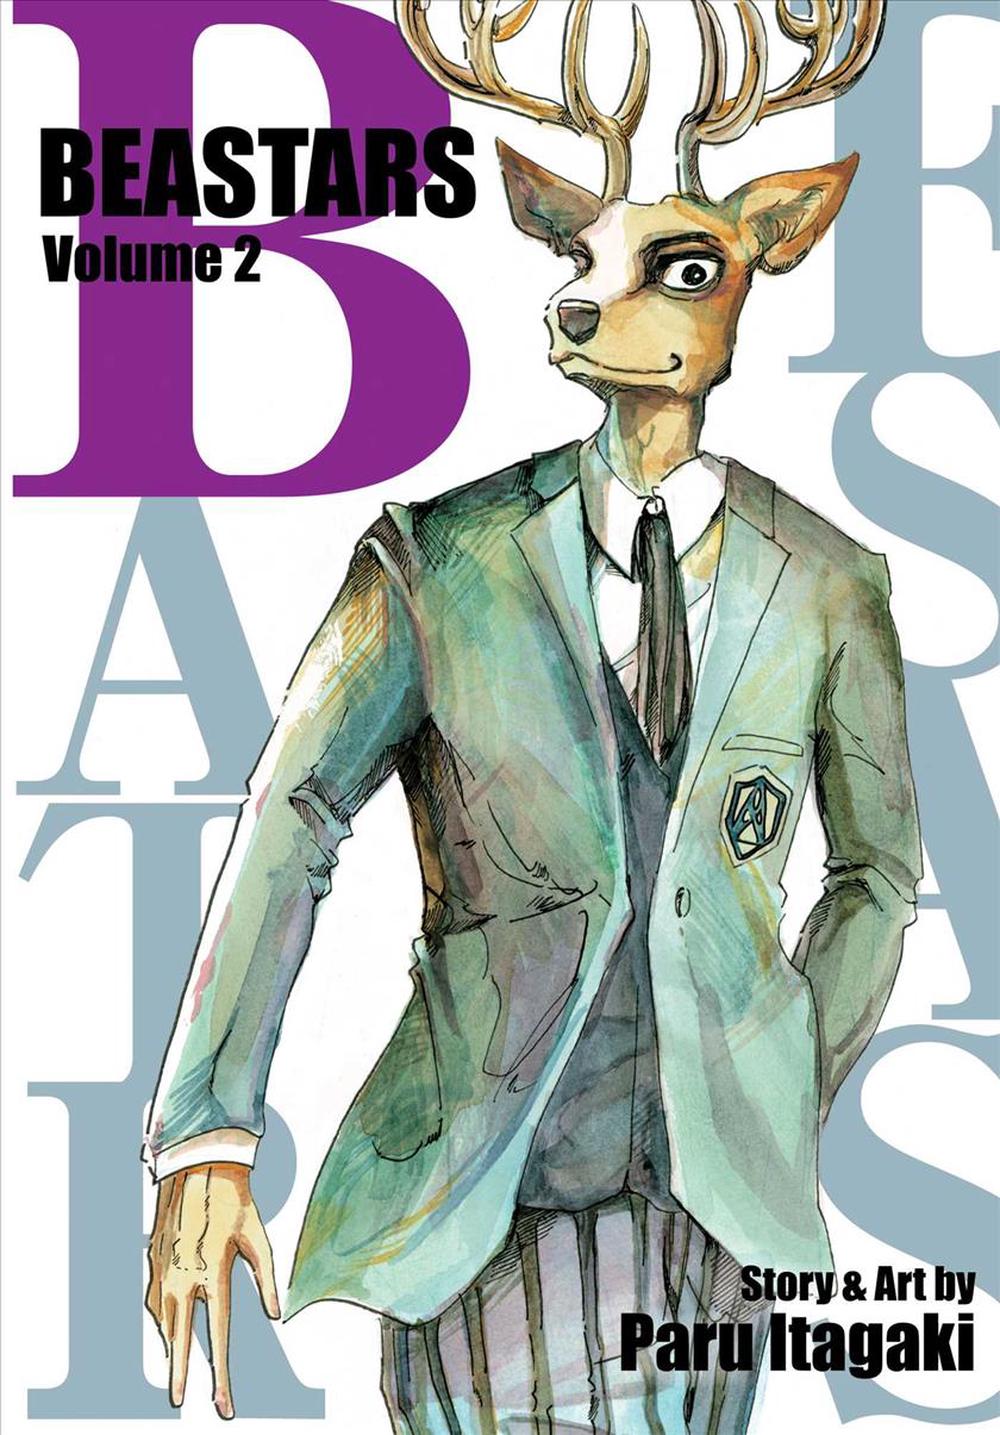 Beastars Vol 2 By Paru Itagaki Paperback Buy Online At The Nile